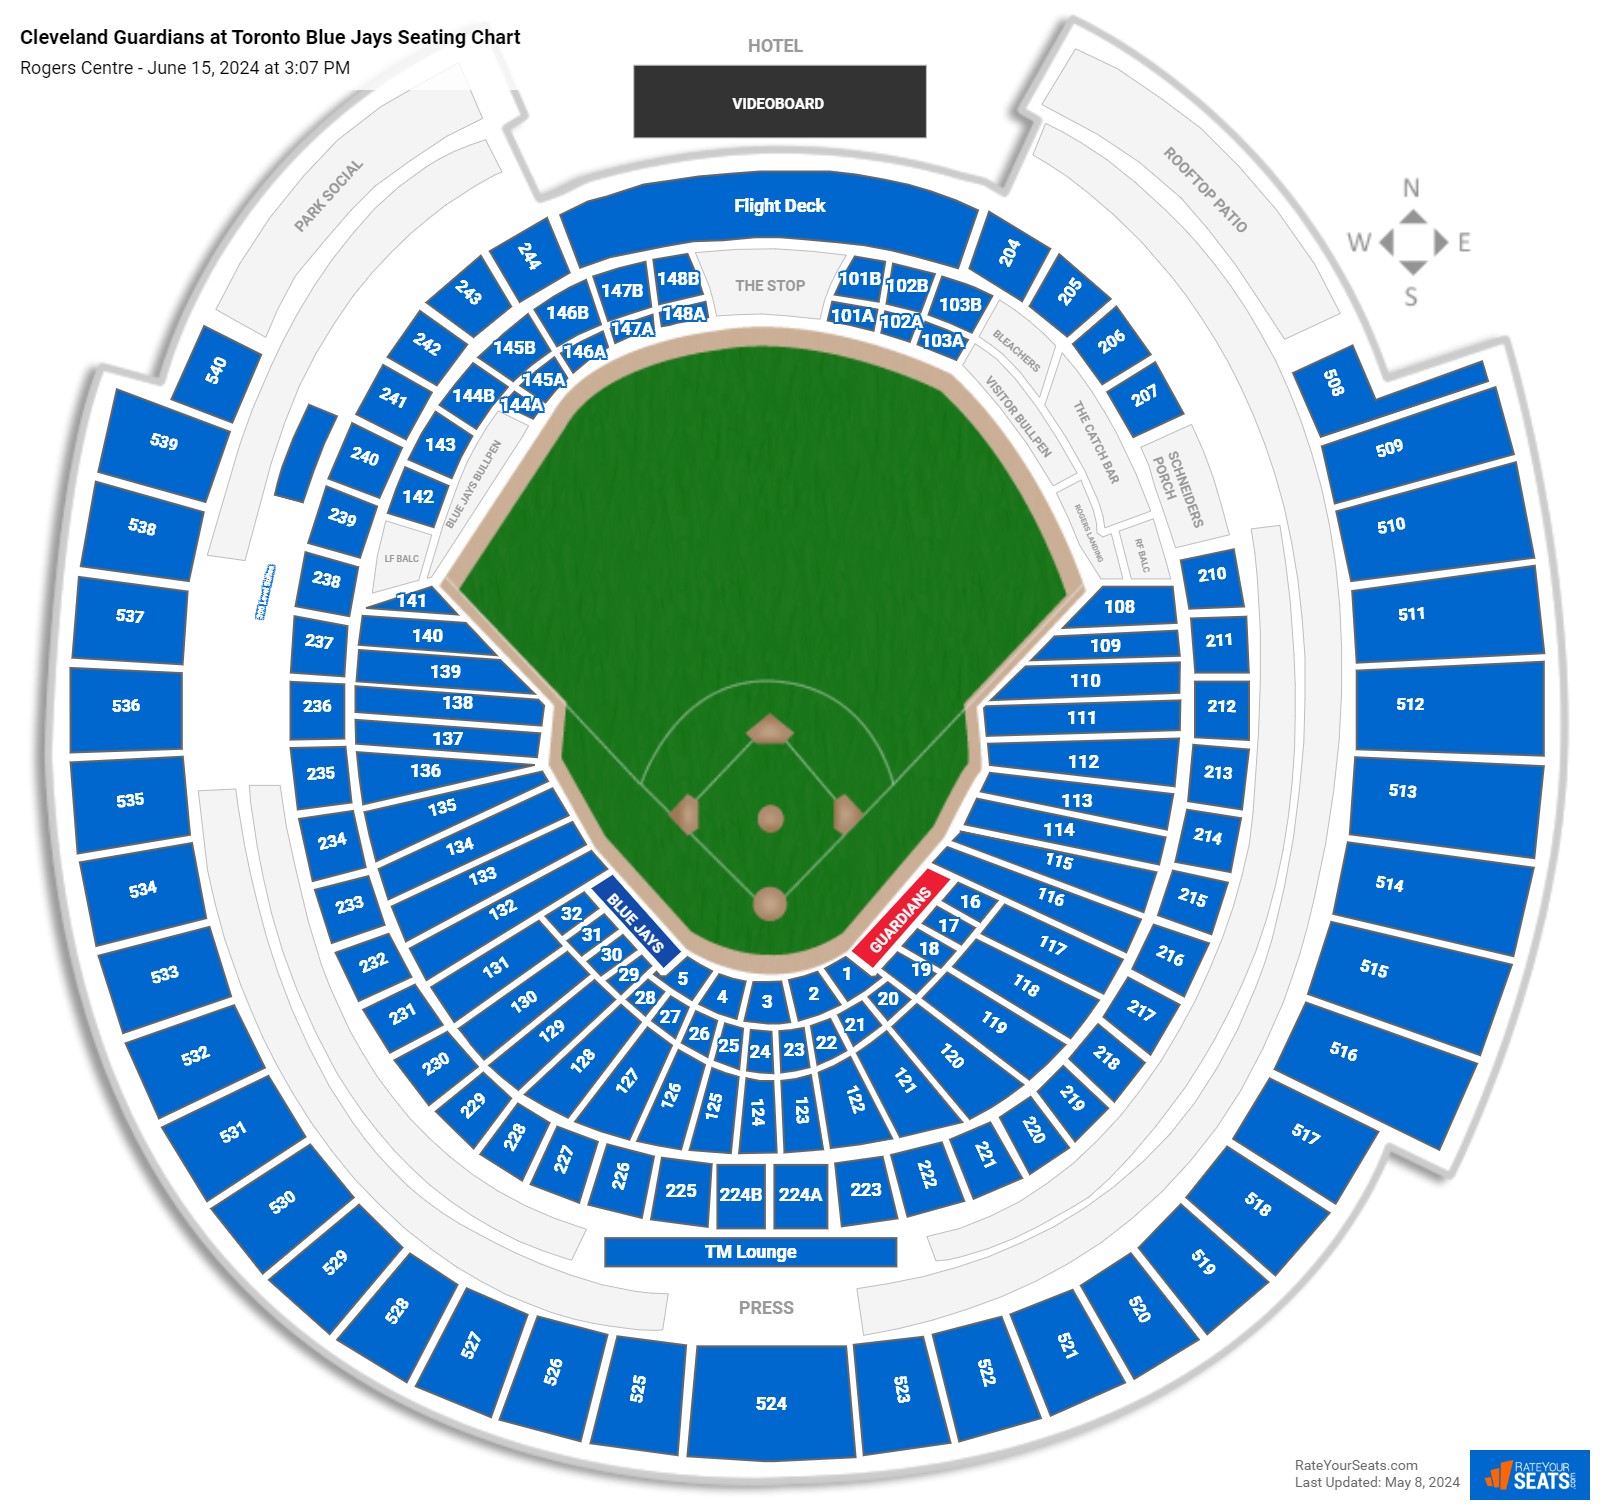 Cleveland Guardians at Toronto Blue Jays seating chart Rogers Centre